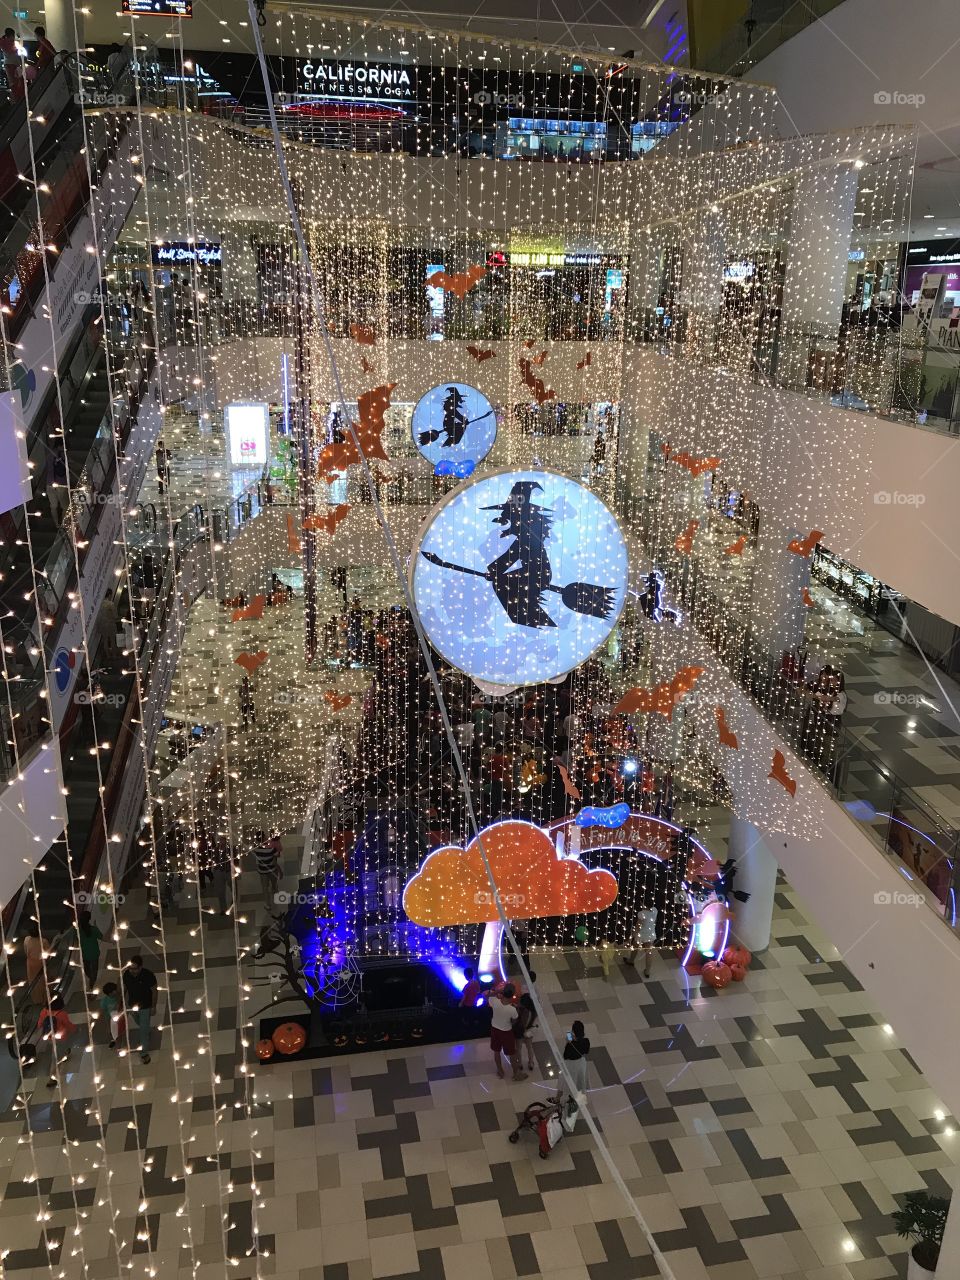 Halloween decorations at a shopping mall